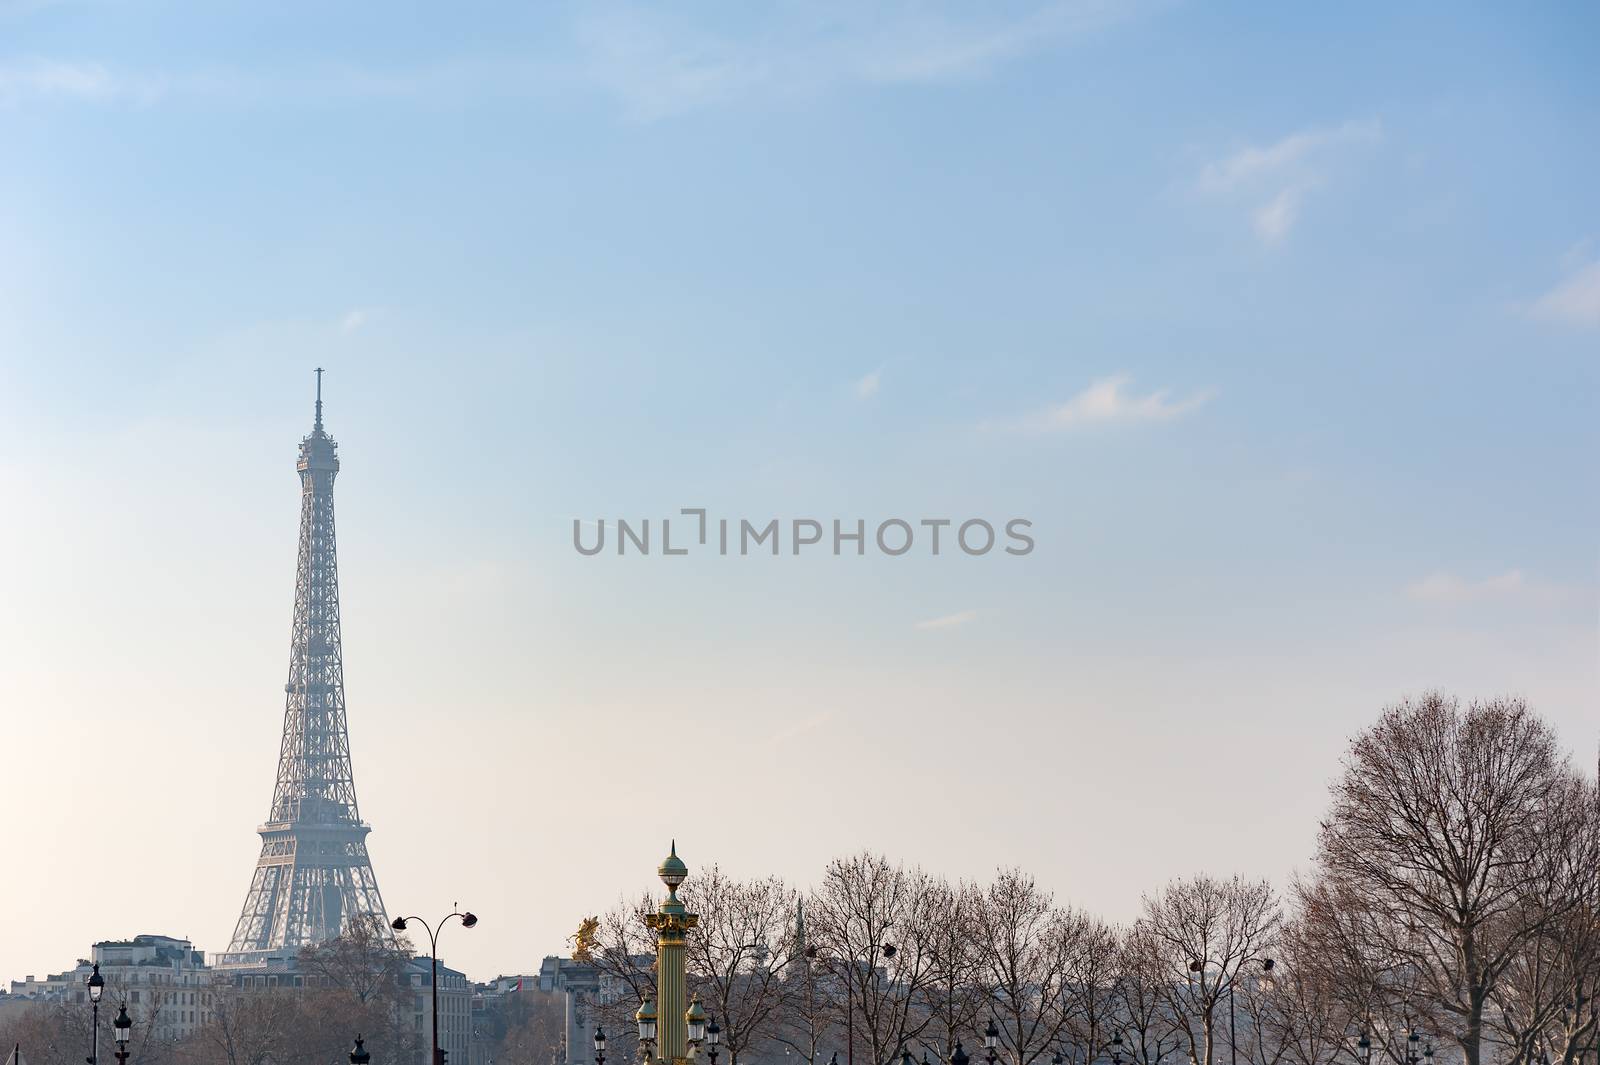 Eiffel tower against blue sky in winter wit naked trees in the foreground, Paris, France